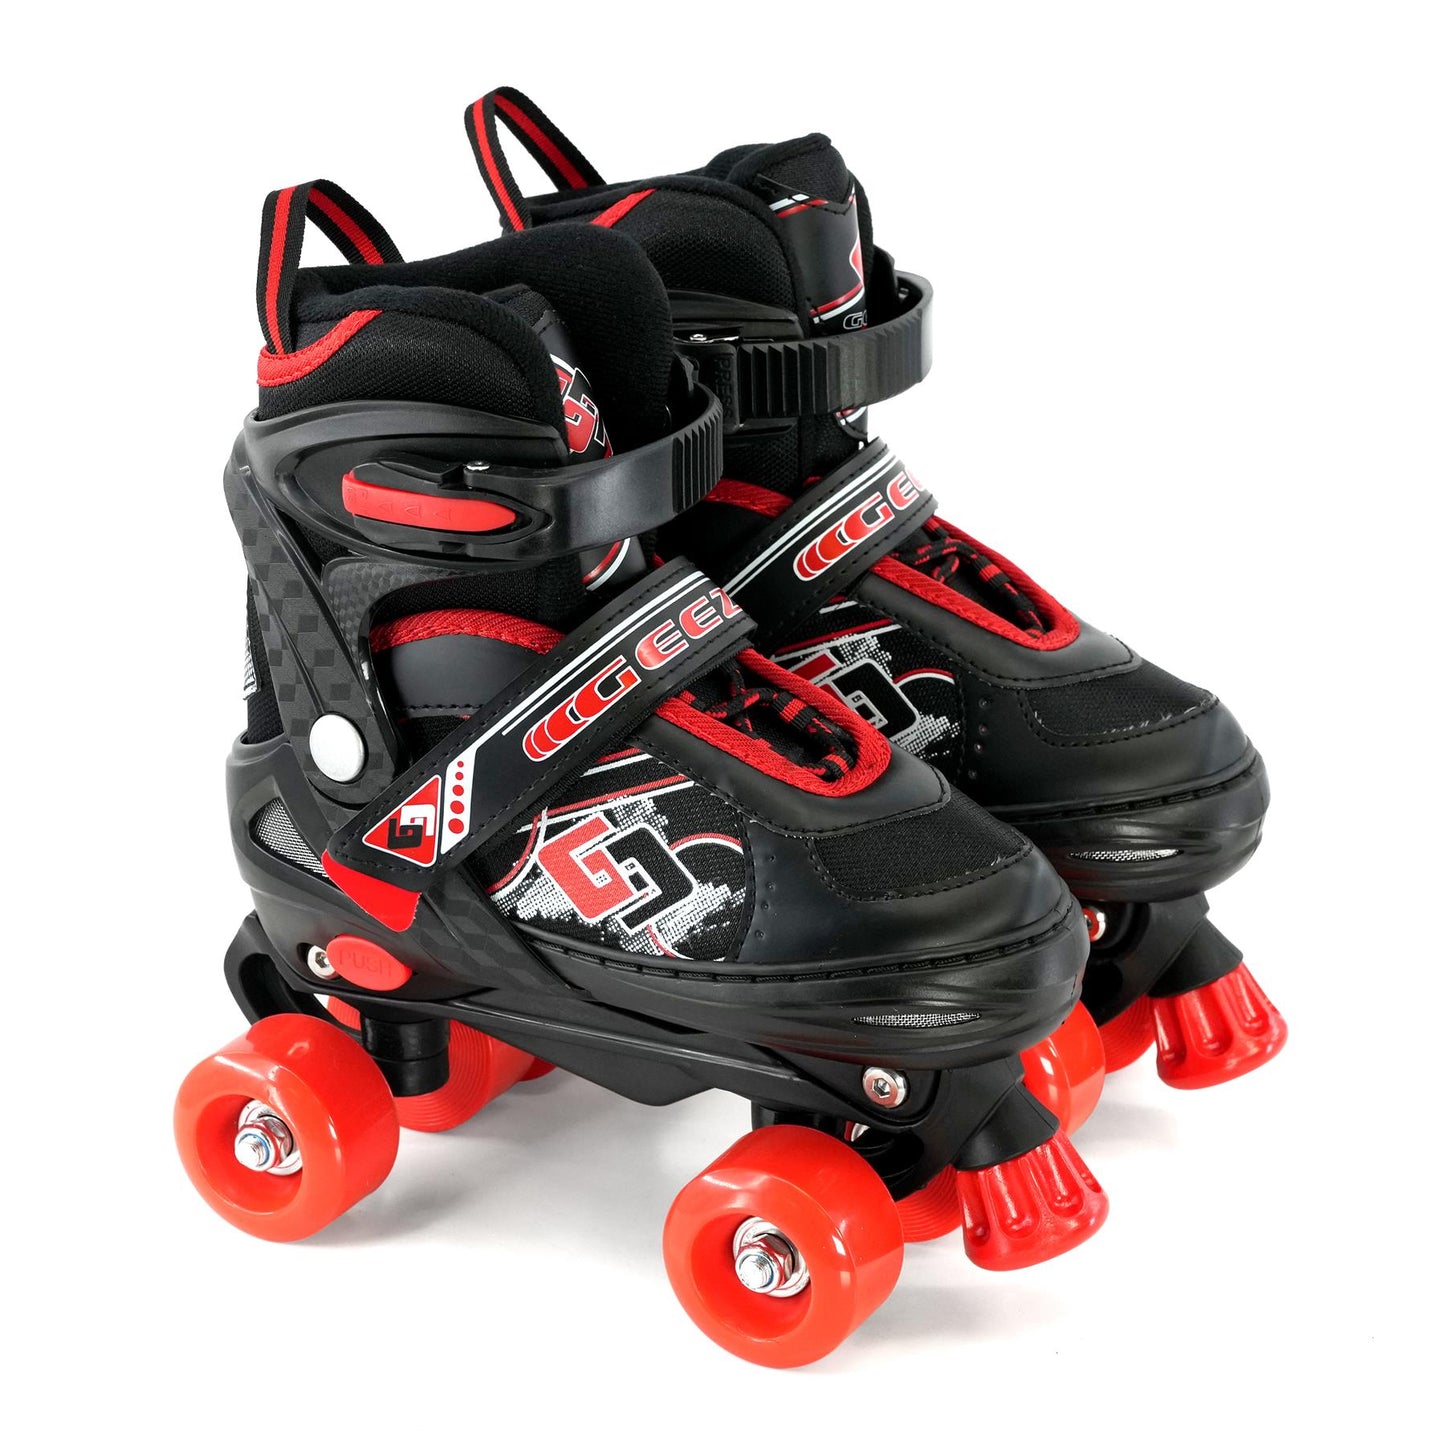 Red and Black Roller Skates for Kids with 4 Wheel by The Magic Toy Shop - UKBuyZone